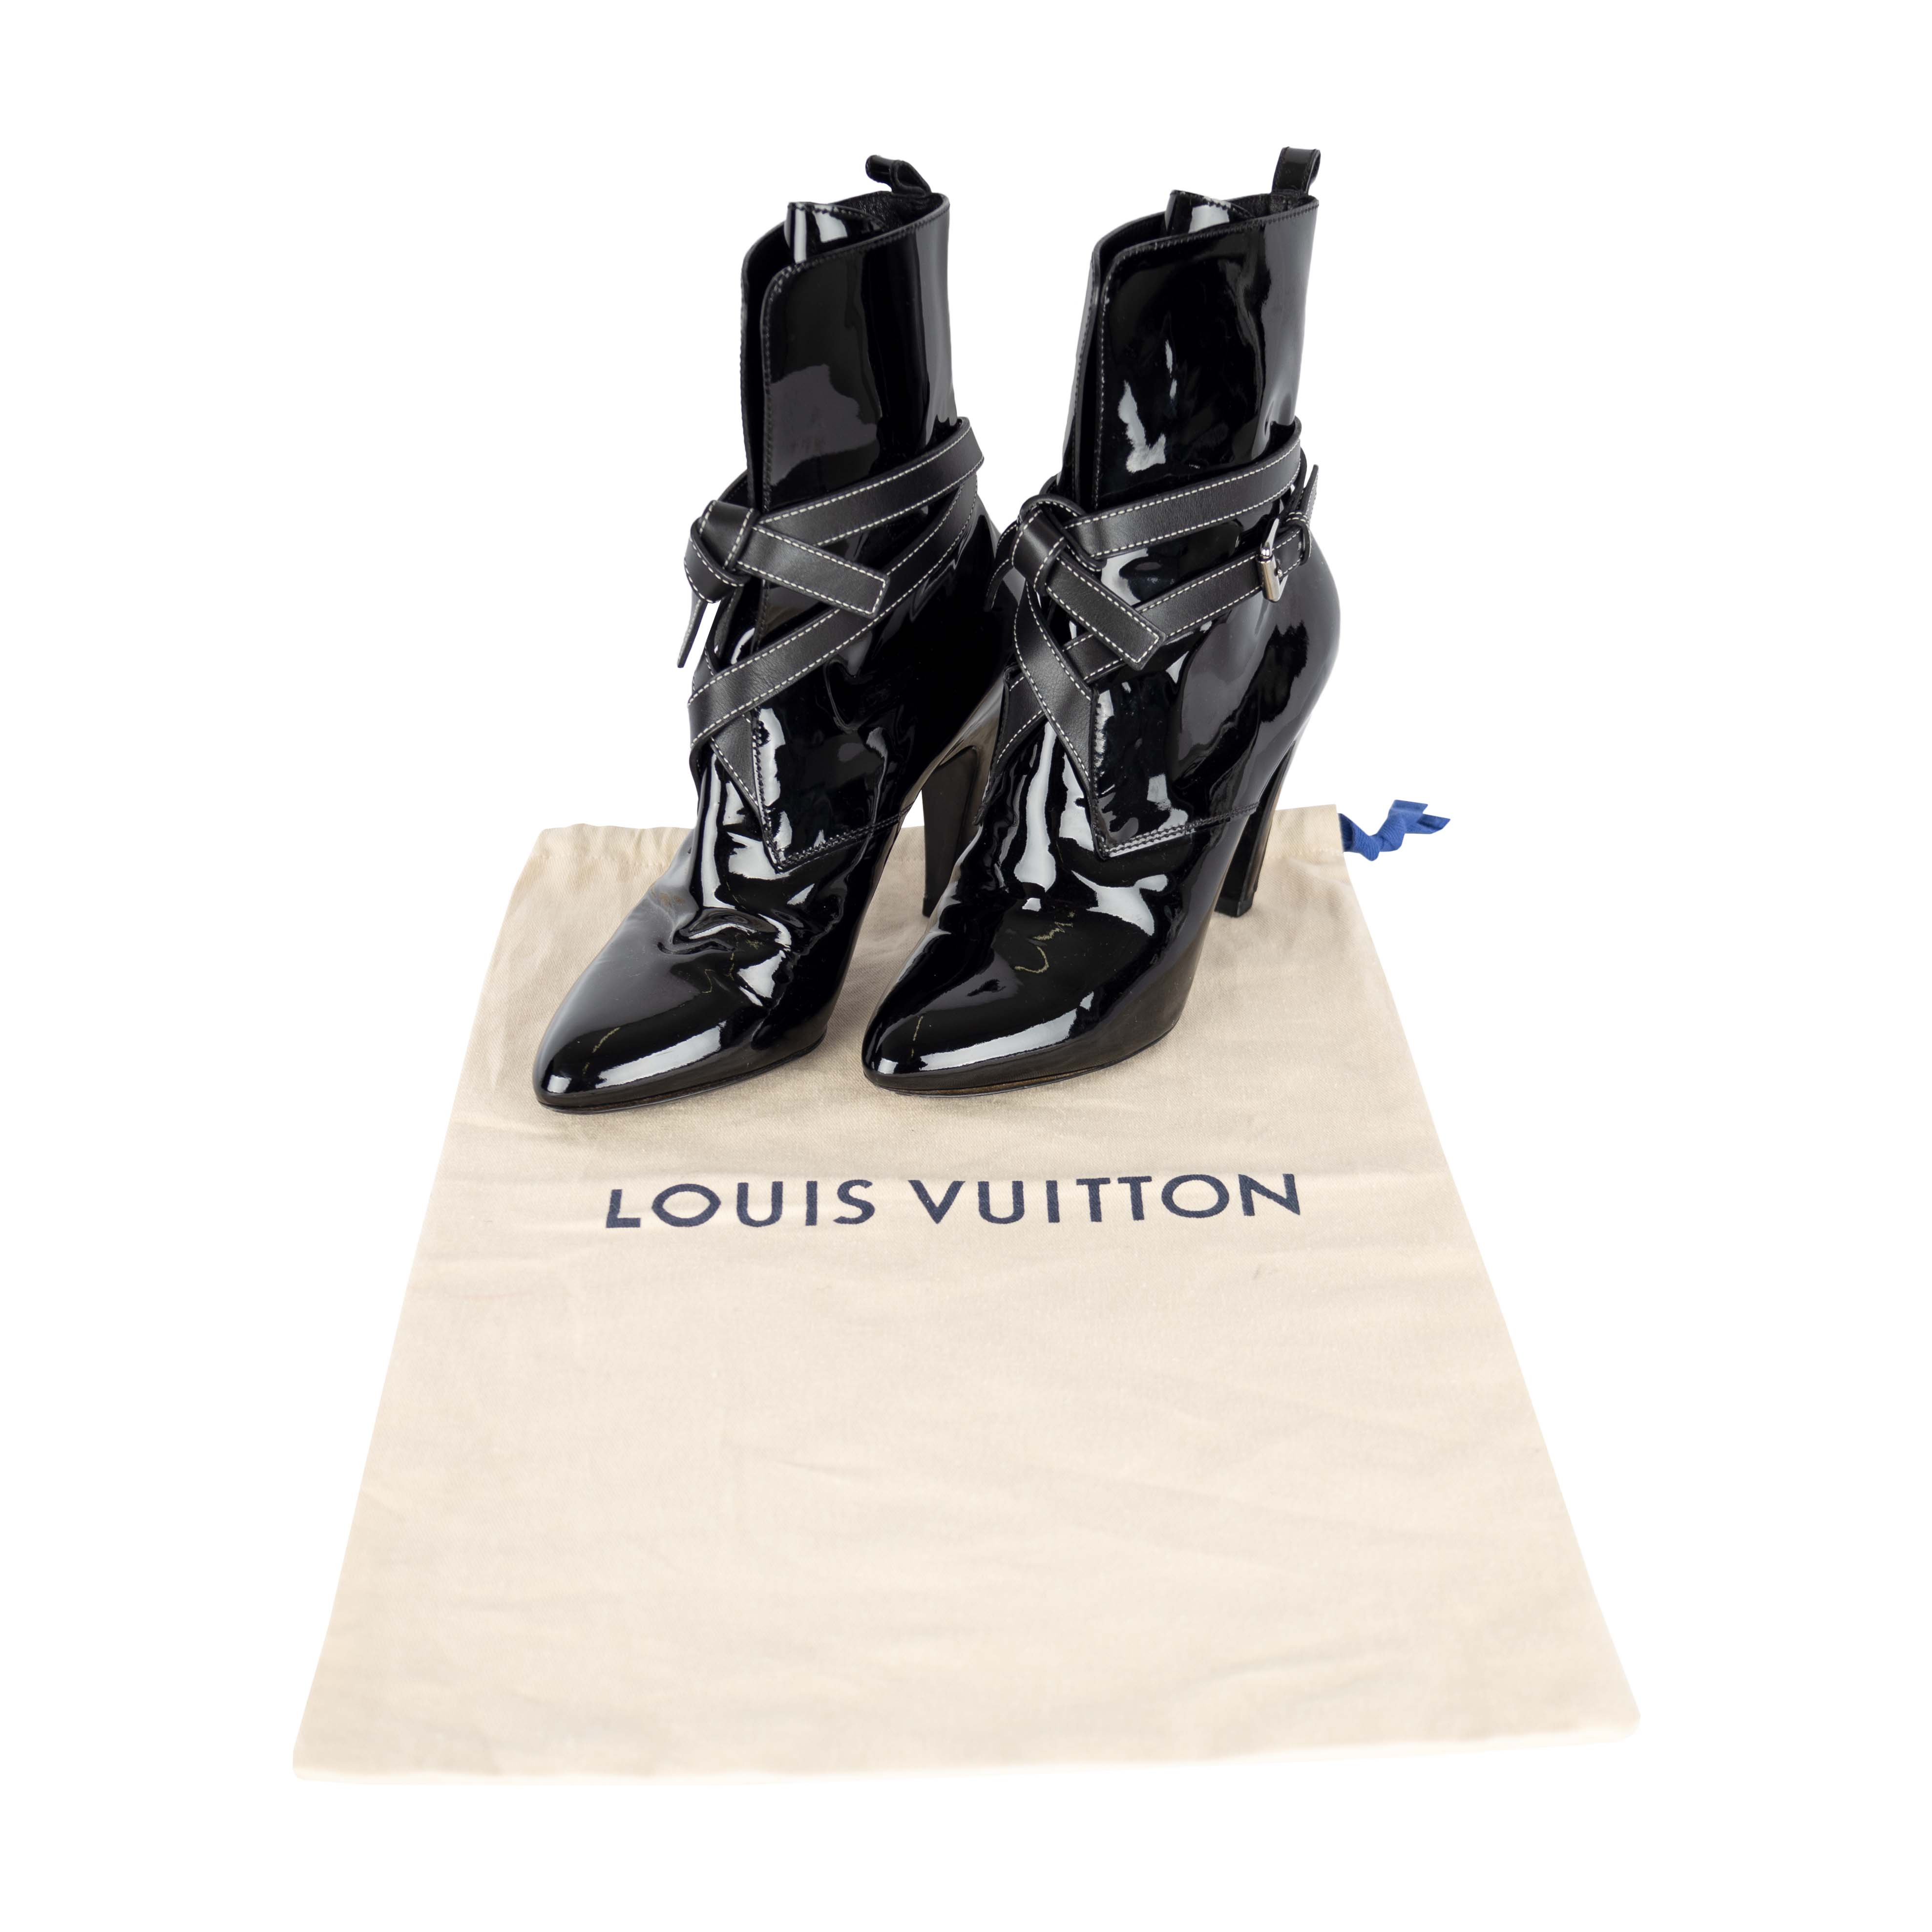 Authentic Louis Vuitton Patent Leather Ankle Boots 39.5